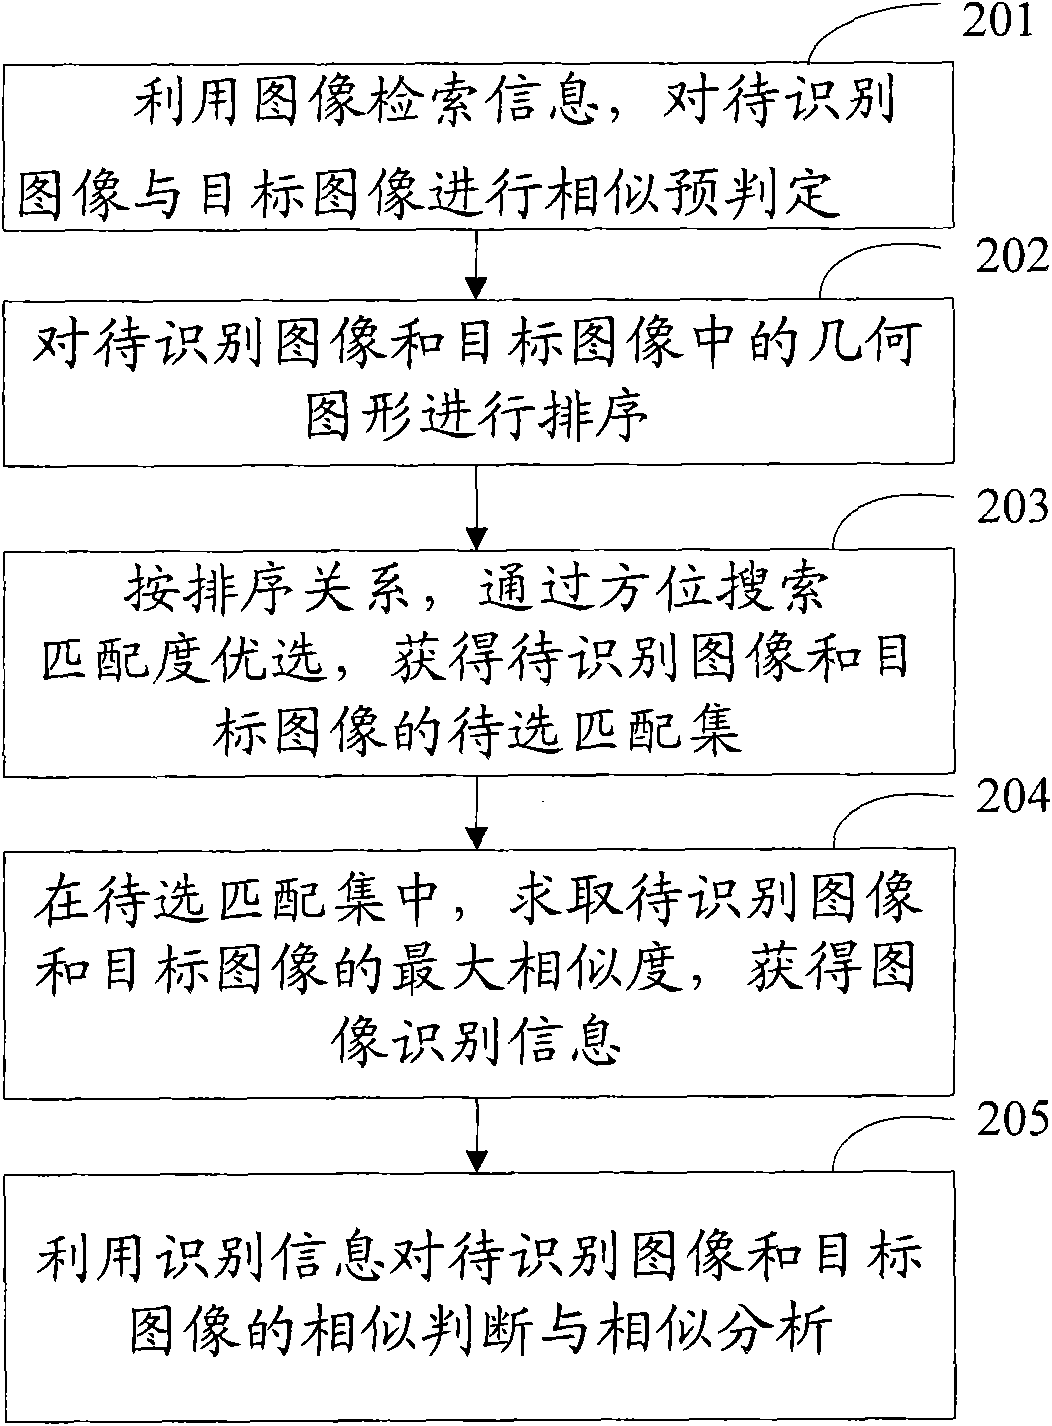 Method and device for image recognition